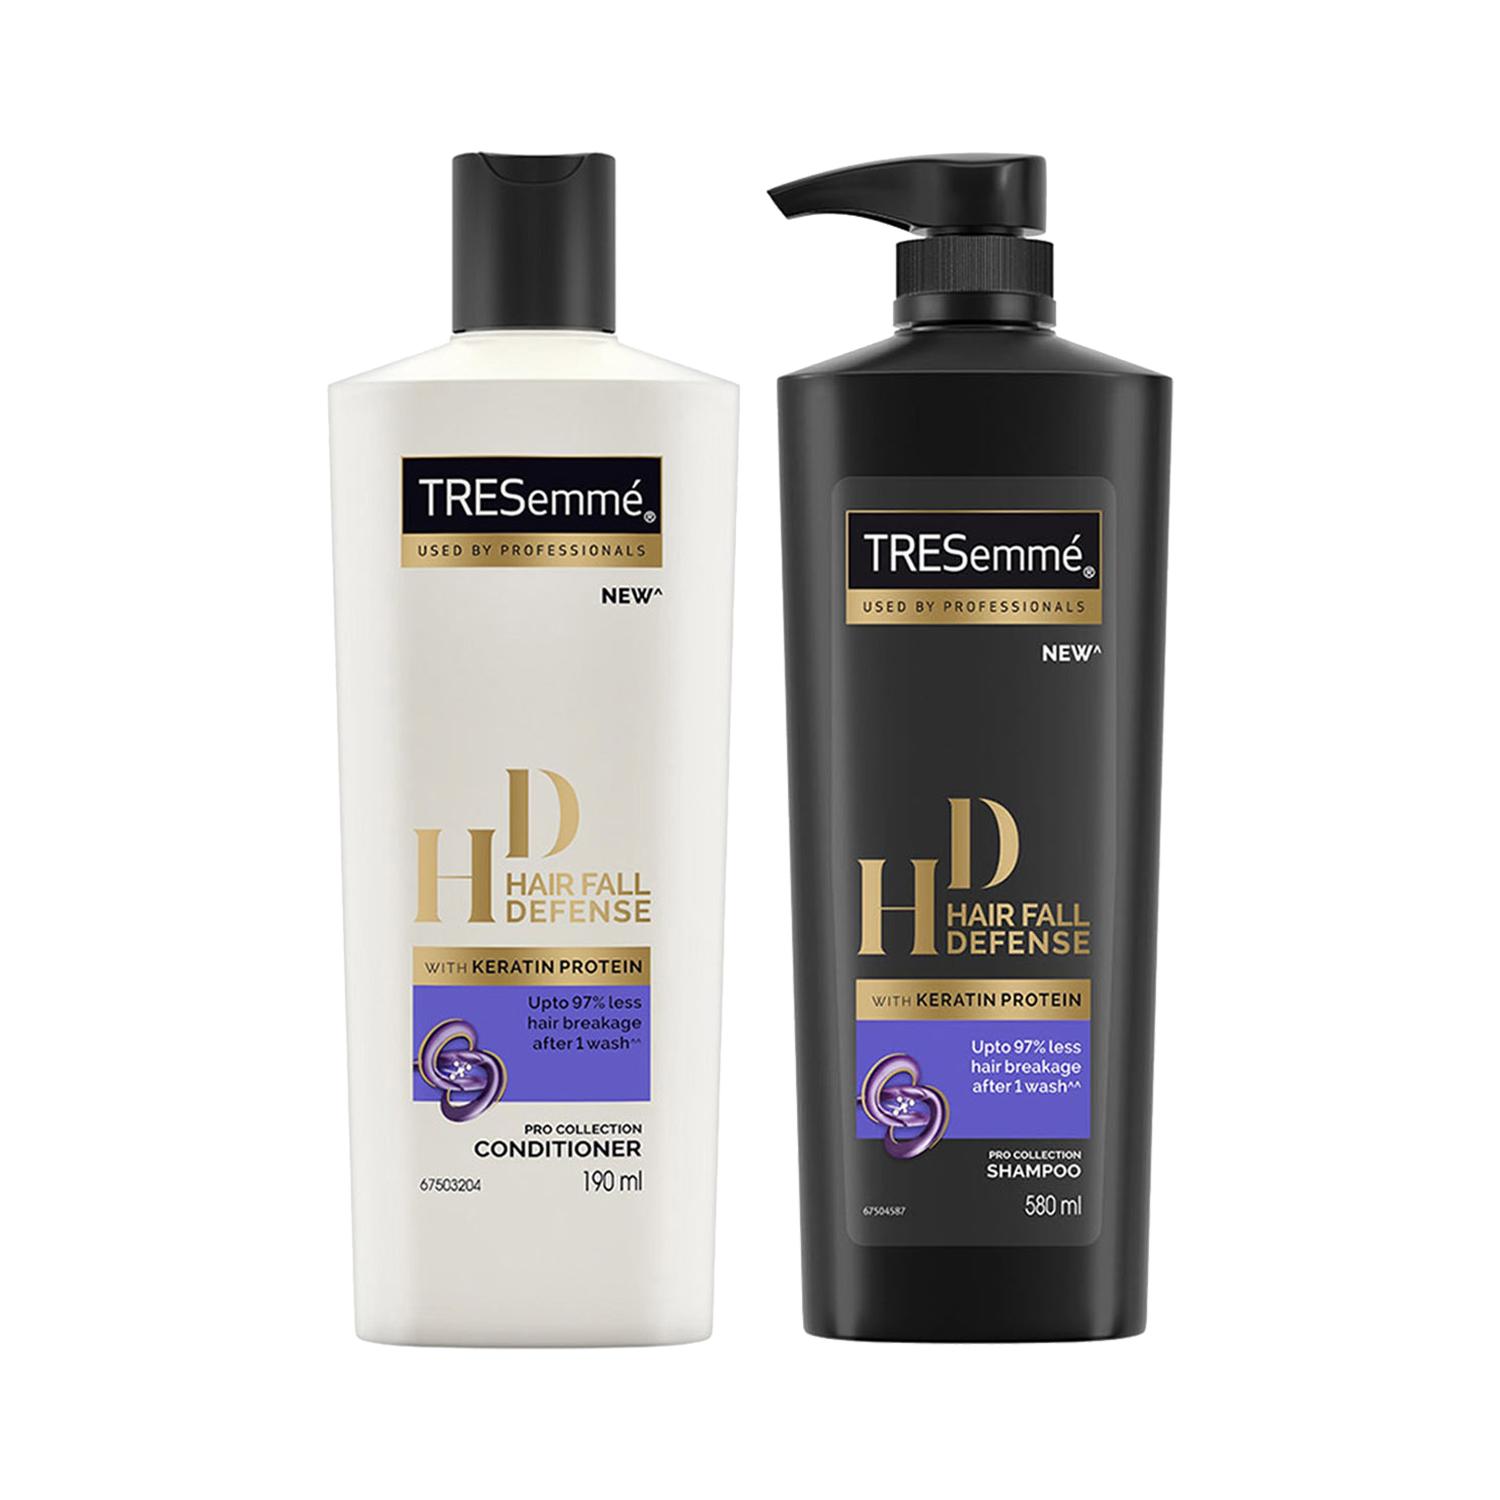 Tresemme | Tresemme Hair Fall Defense Shampoo + Conditioner Combo